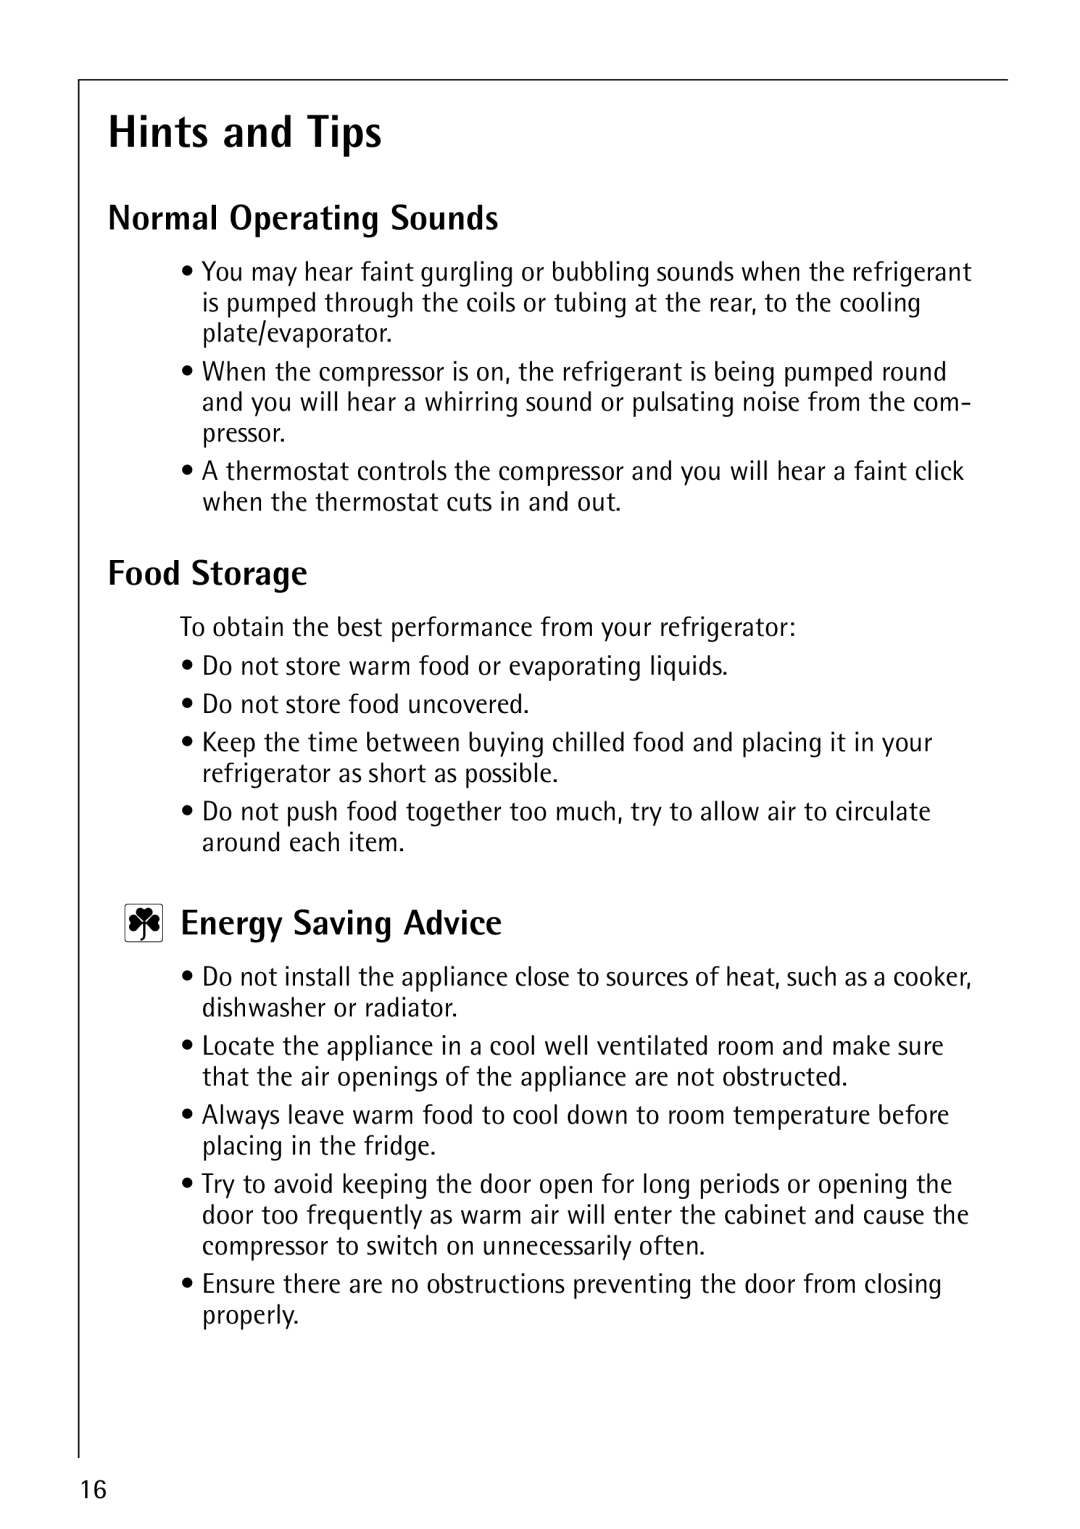 Electrolux Integrated operating instructions Hints and Tips, Normal Operating Sounds, Food Storage, Energy Saving Advice 